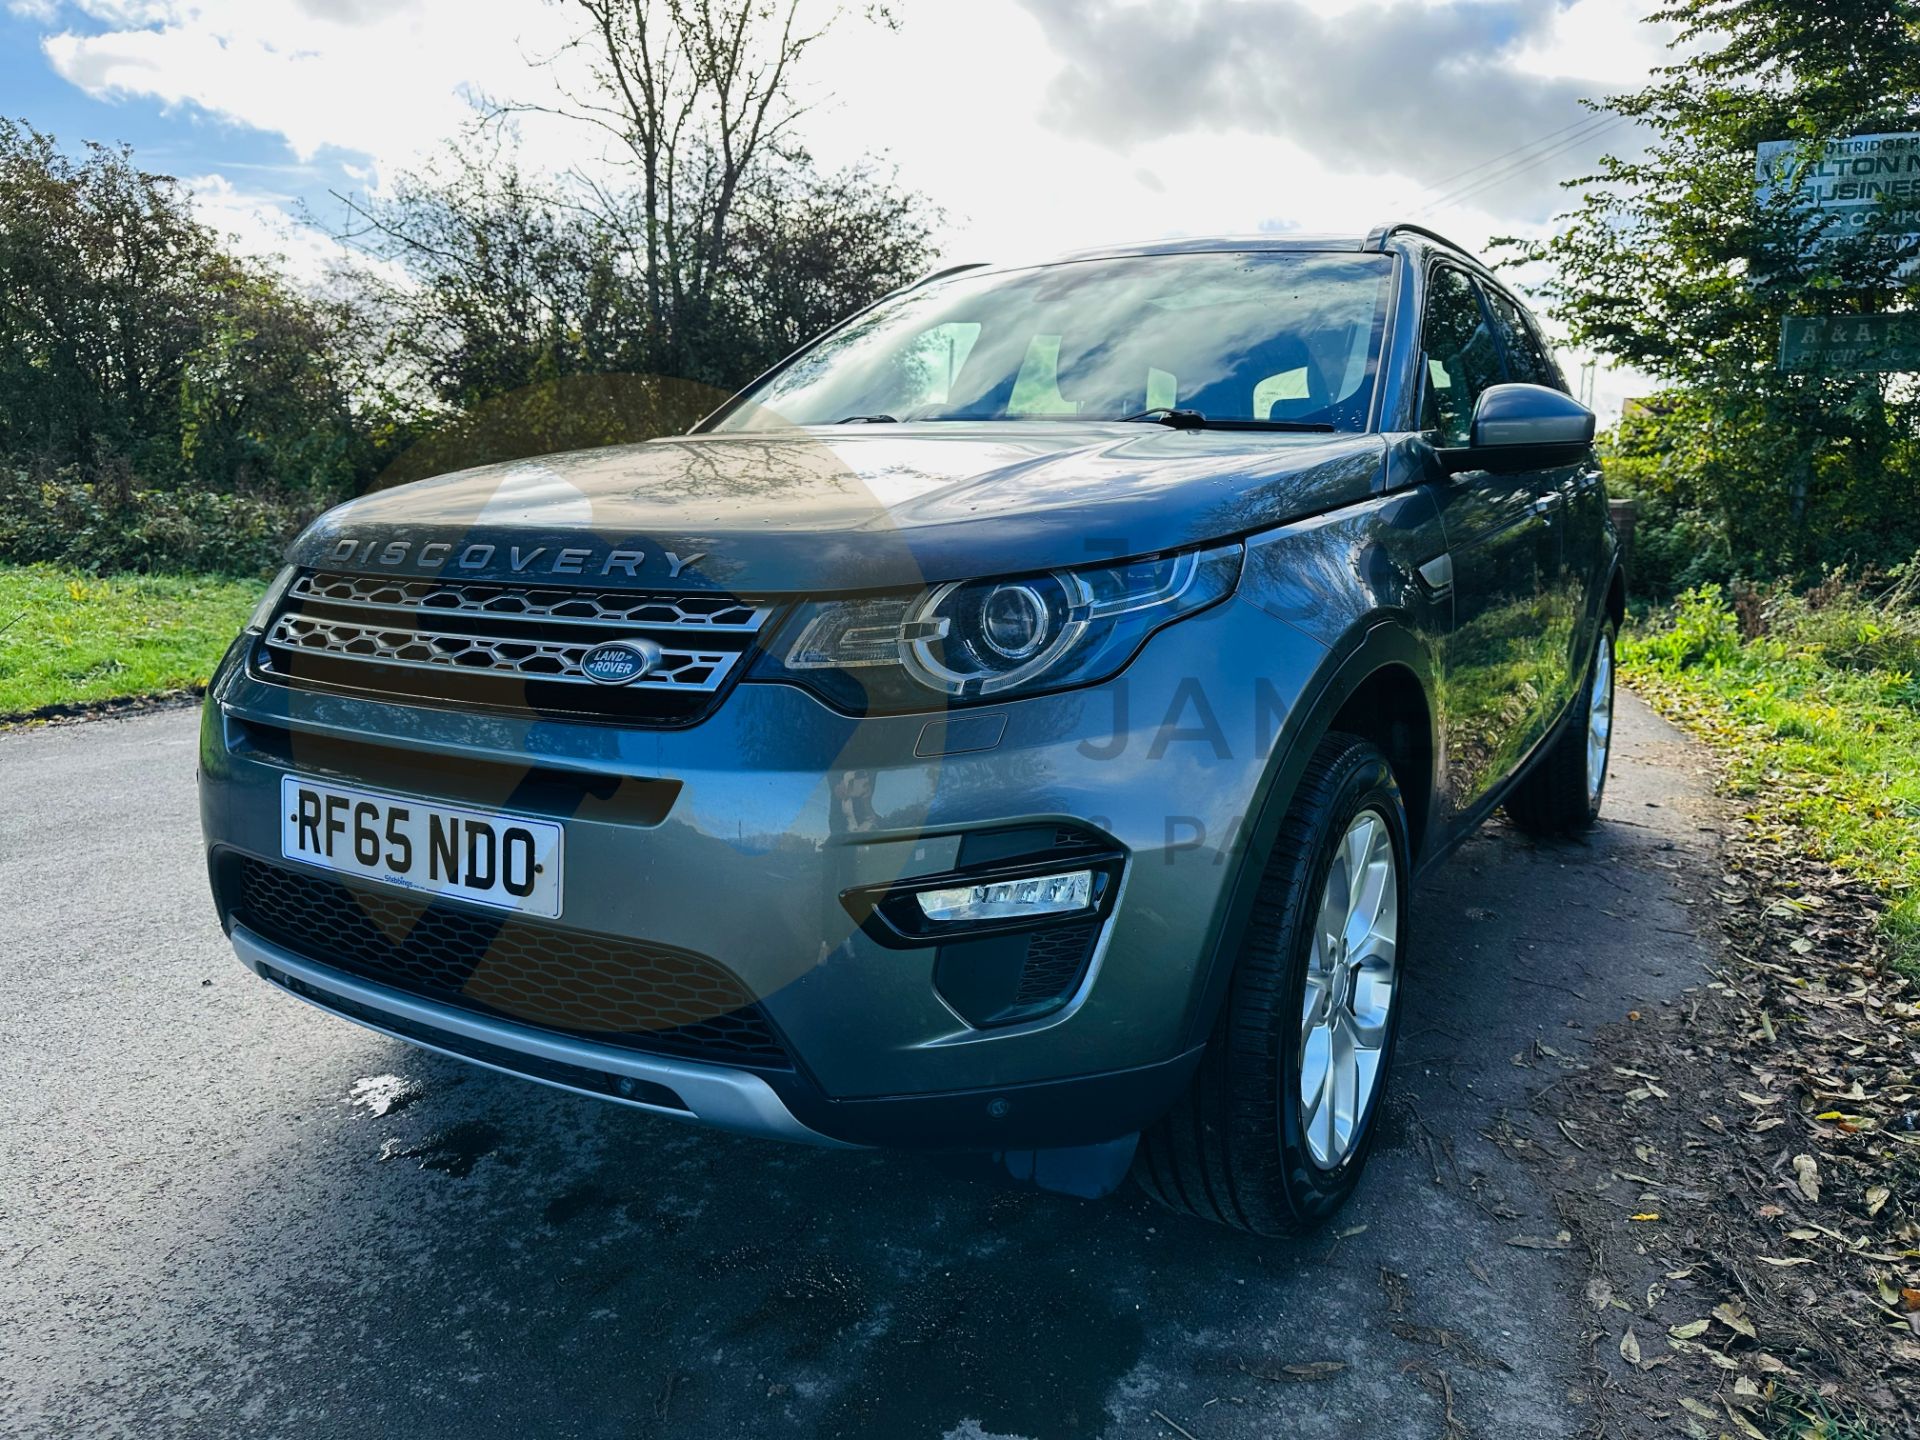 (ON SALE) LAND ROVER DISCOVERY SPORT *HSE EDITION* 7 SEATER SUV (2016 MODEL) 2.0 TD4-AUTO STOP/START - Image 5 of 56